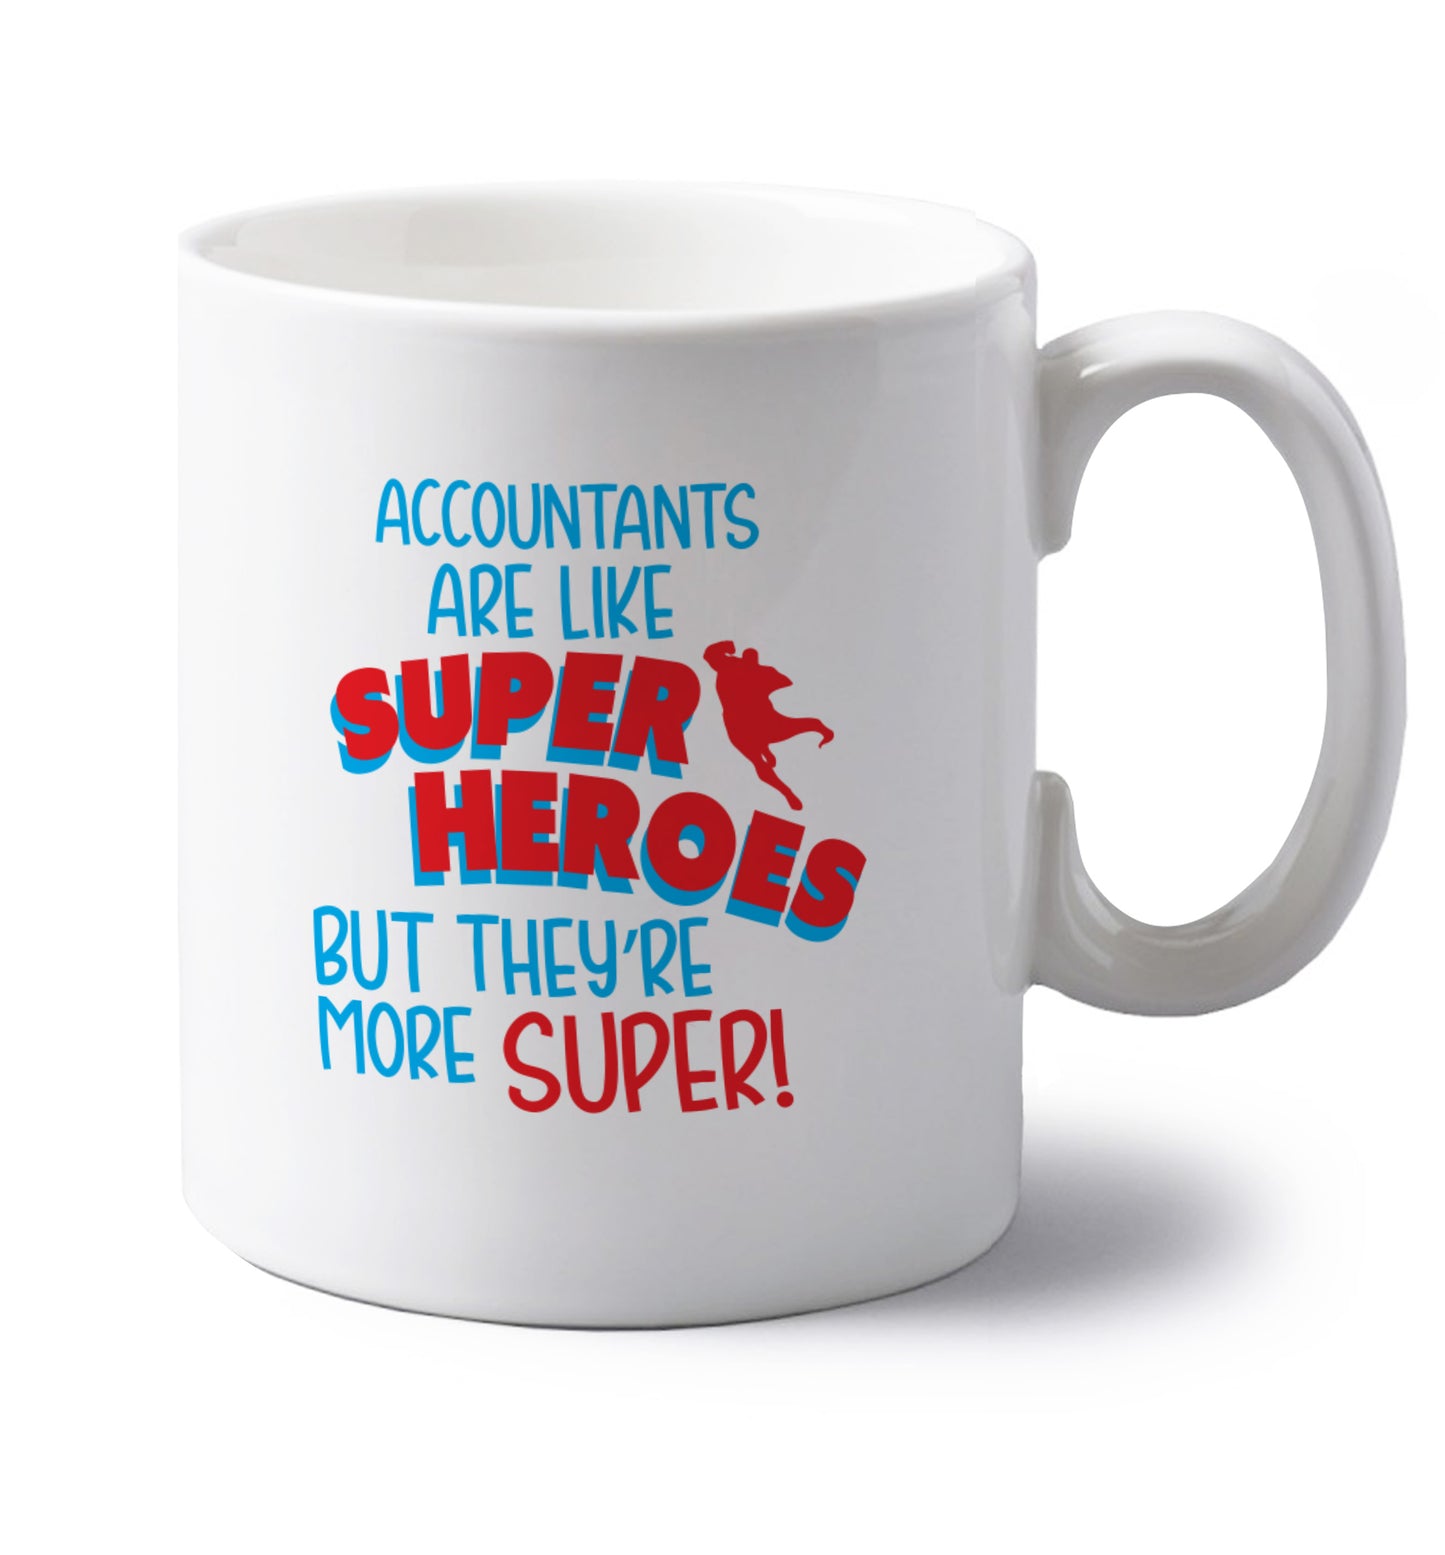 Accountants are like superheroes but they're more super left handed white ceramic mug 